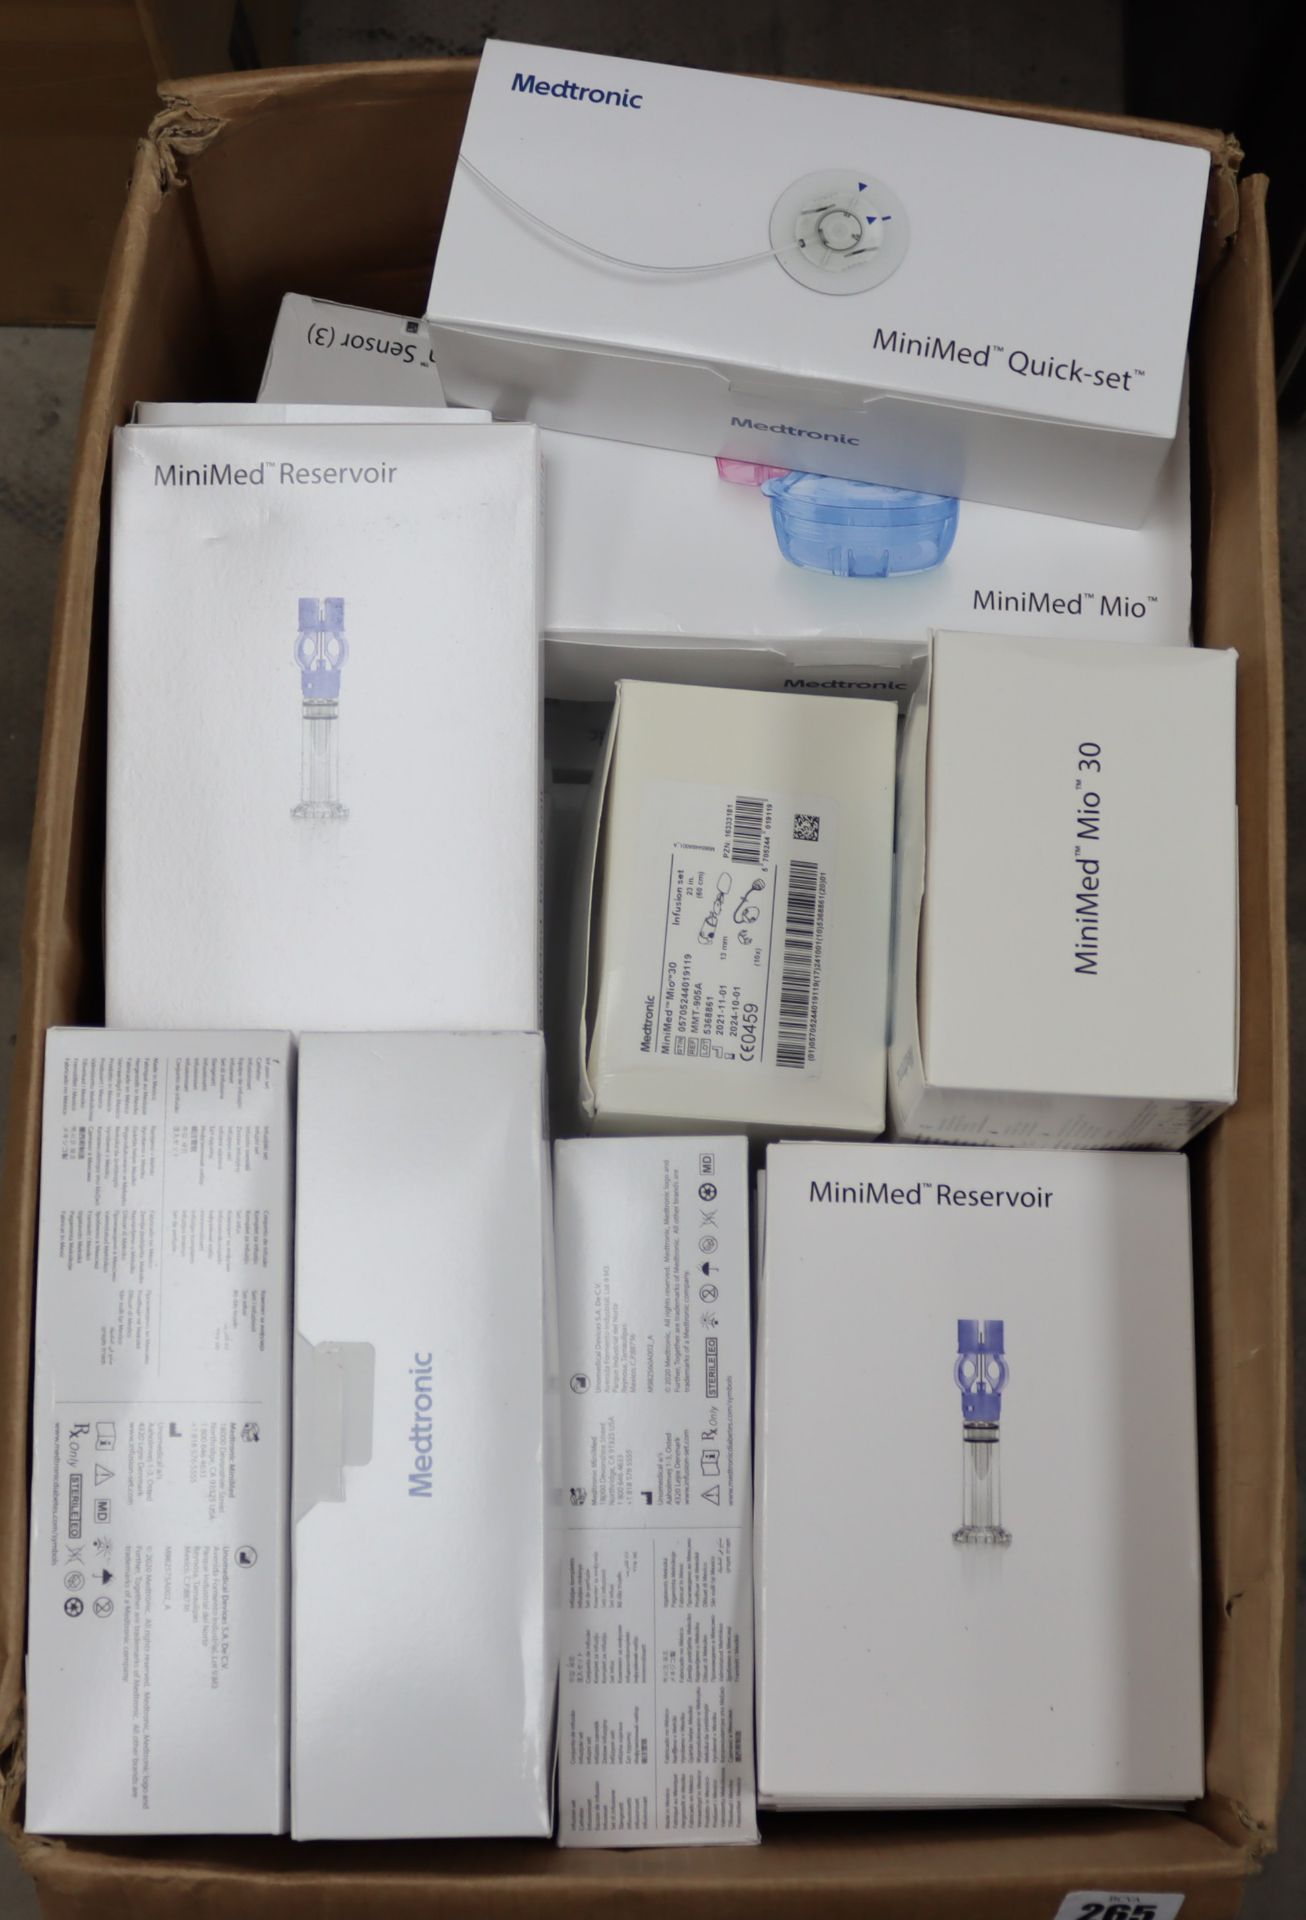 A quantity of boxed as new Medtronic products to included: 3 x Minimed mio Advance, 18 x Minimed res